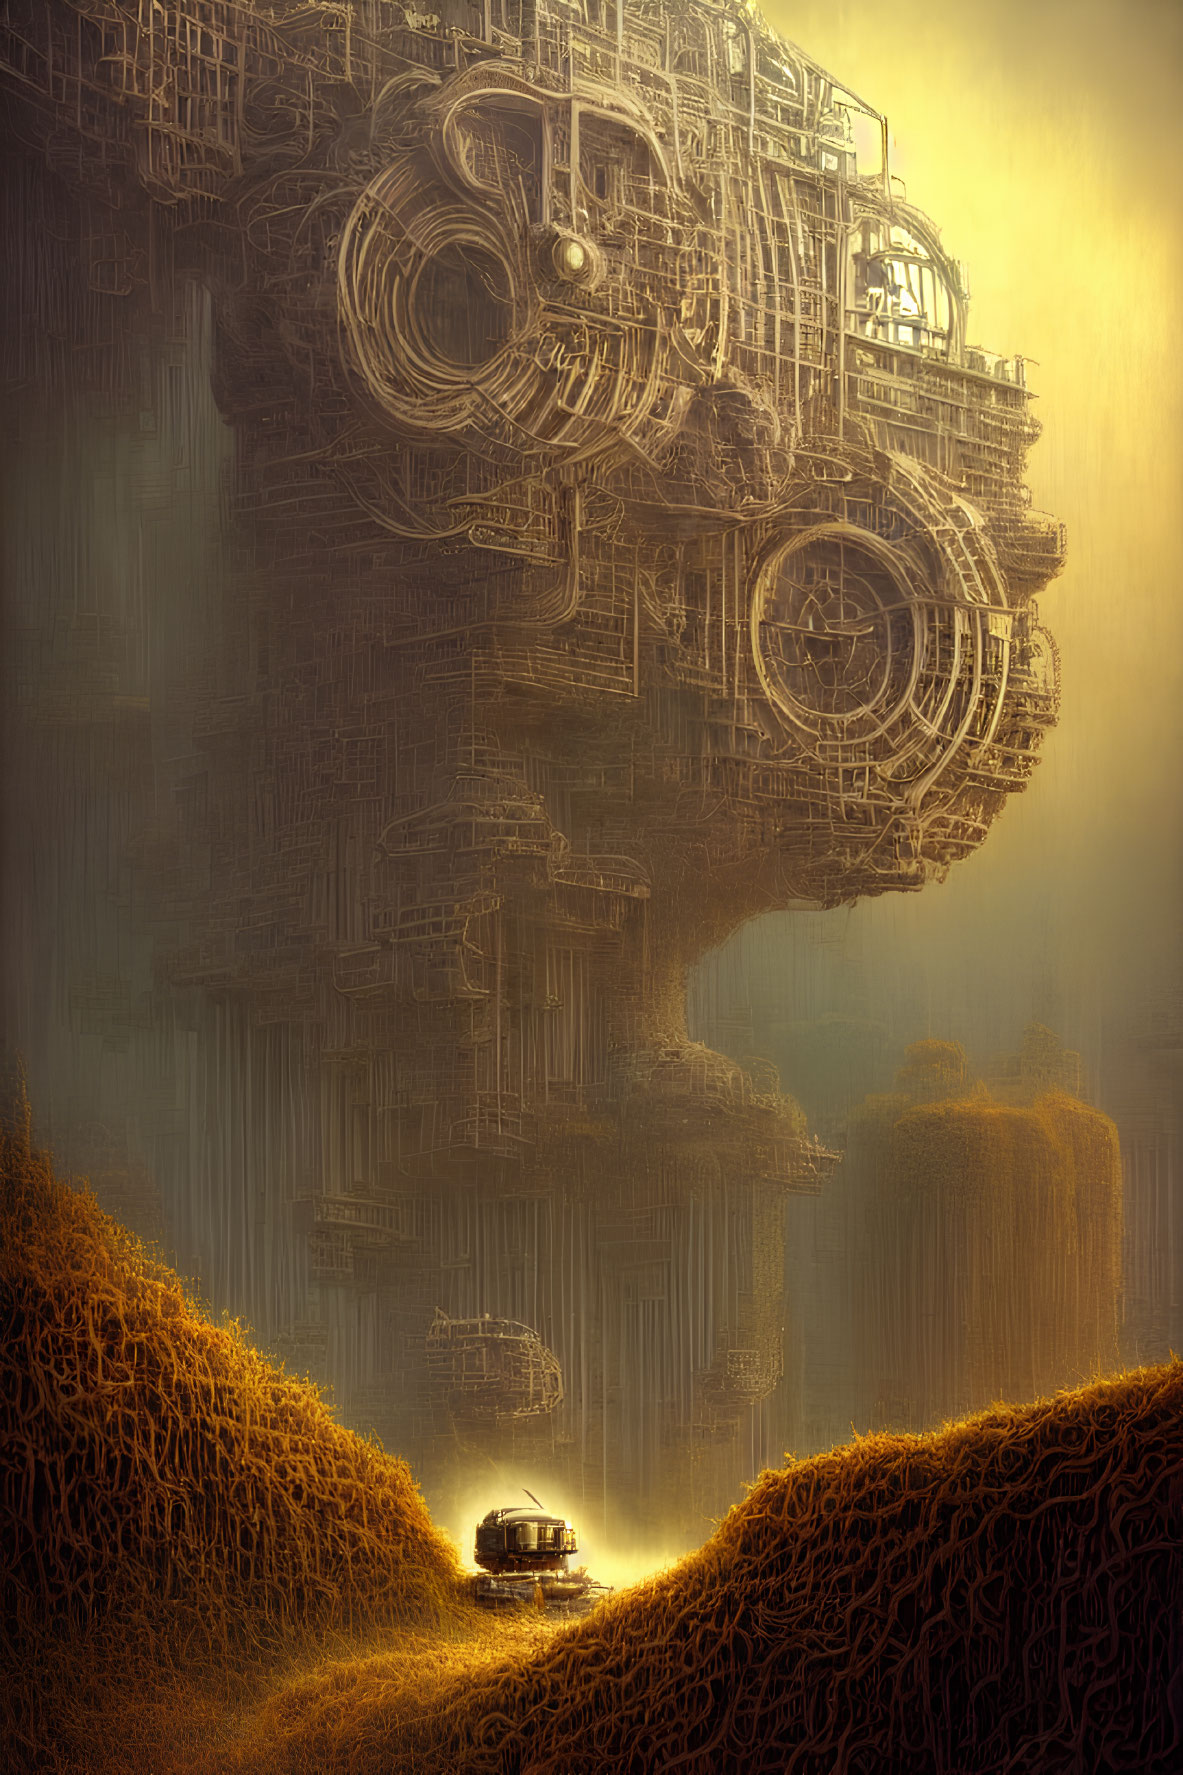 Surreal landscape with massive mechanical structure and lone vehicle driving.